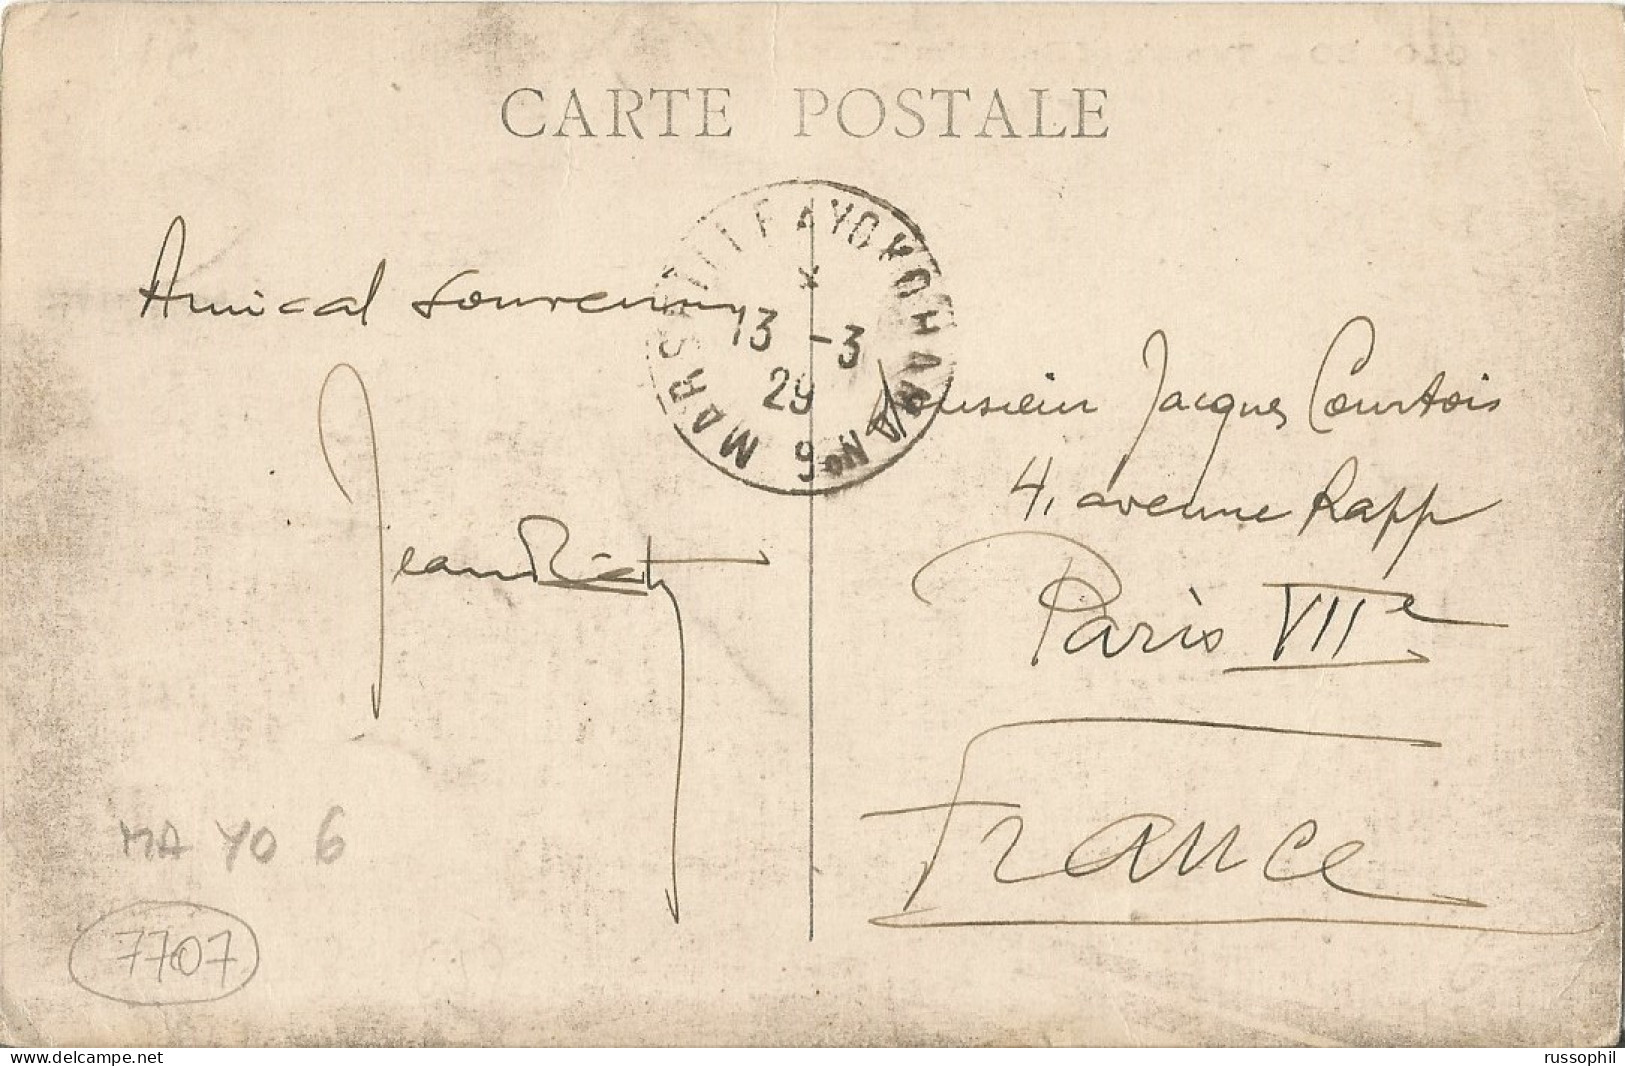 FRANCE - SEA POST - “MARSEILLE TO YOKOHAMA" DEPARTURE CDS ON FRANKED PC (VIEW OF CEYLON / COLOMBO) TO FRANCE - 1929 - Poste Maritime